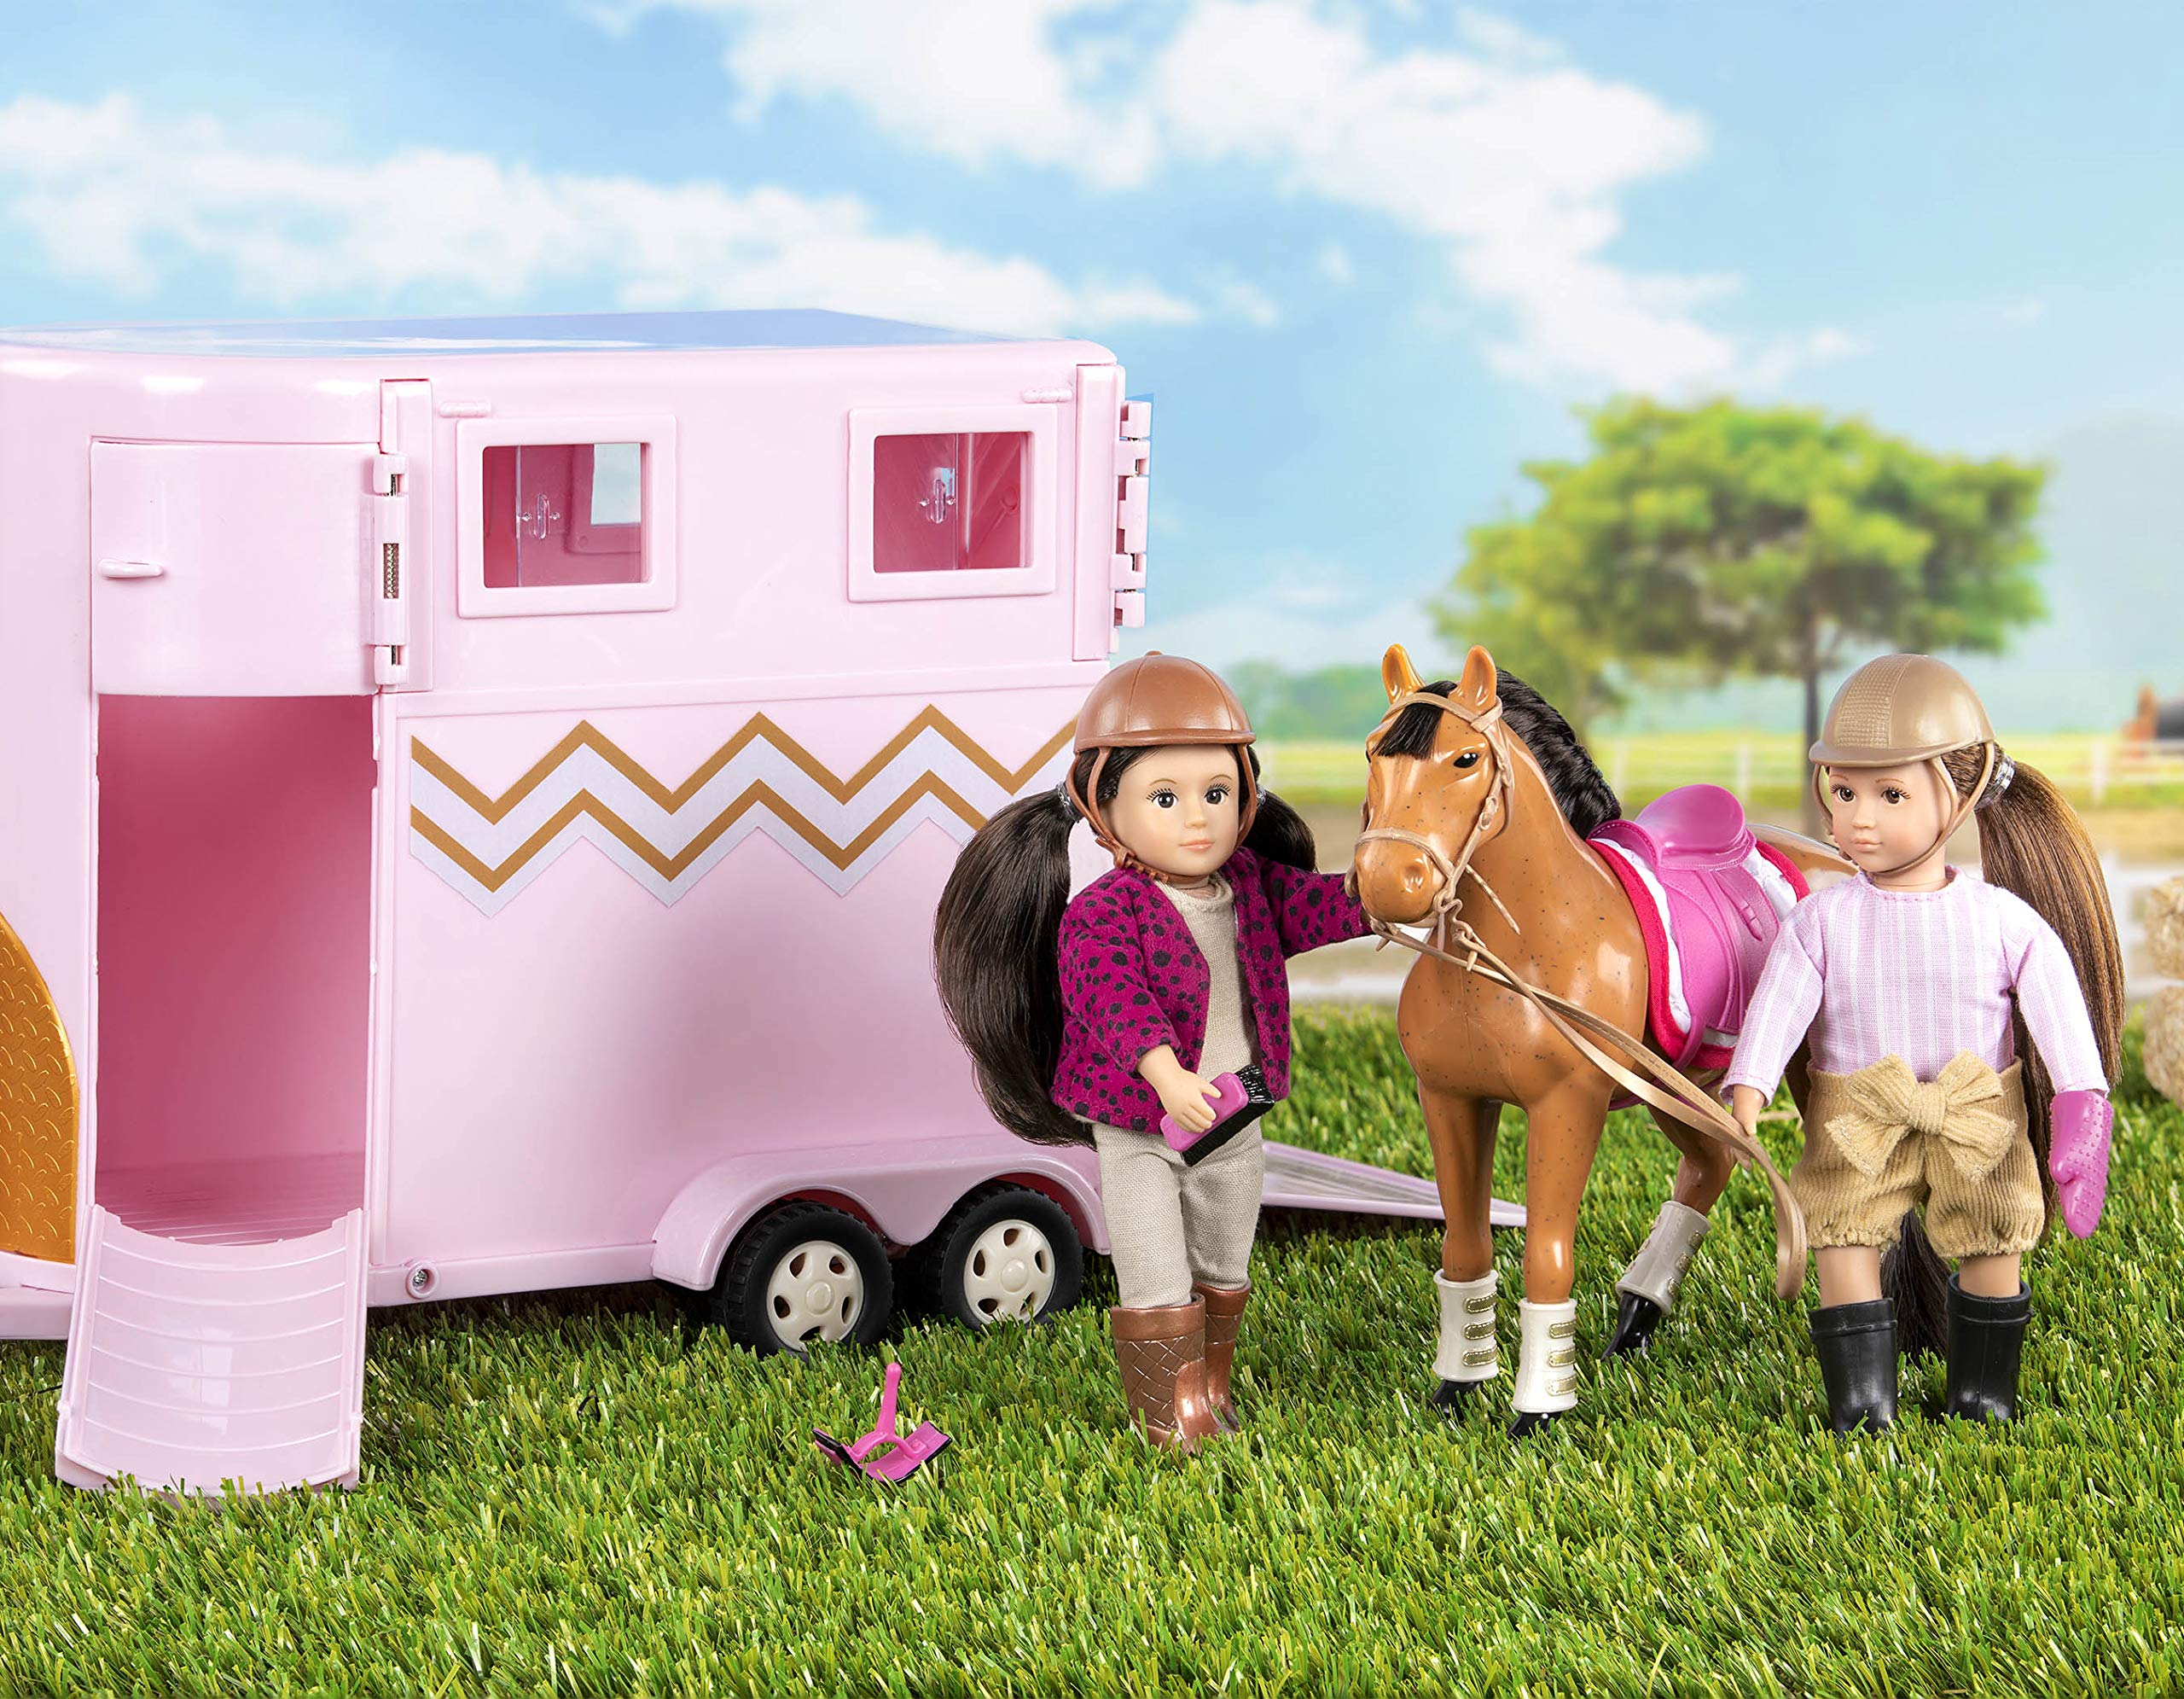 Lori Dolls – Hoofing It – Horse Trailer – Play Set for 6-inch Horses & Mini Dolls – Horse Accessories – Saddle, Bridle, Brush & More – 3 Years +